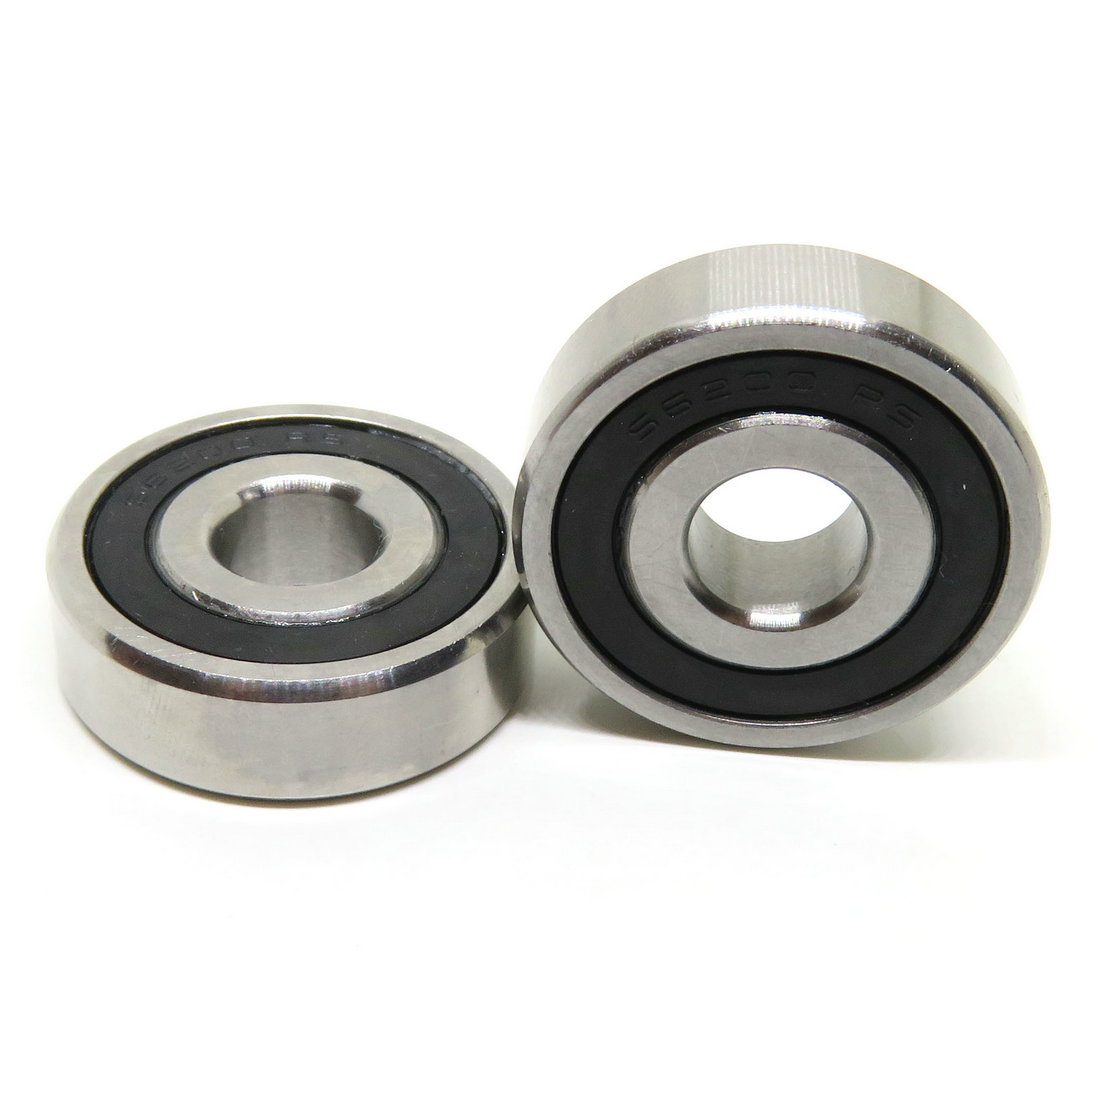 Pharmaceutical Applications Part 35x80x21mm Stainless Steel Deep Groove Ball Bearing S607RS.jpg